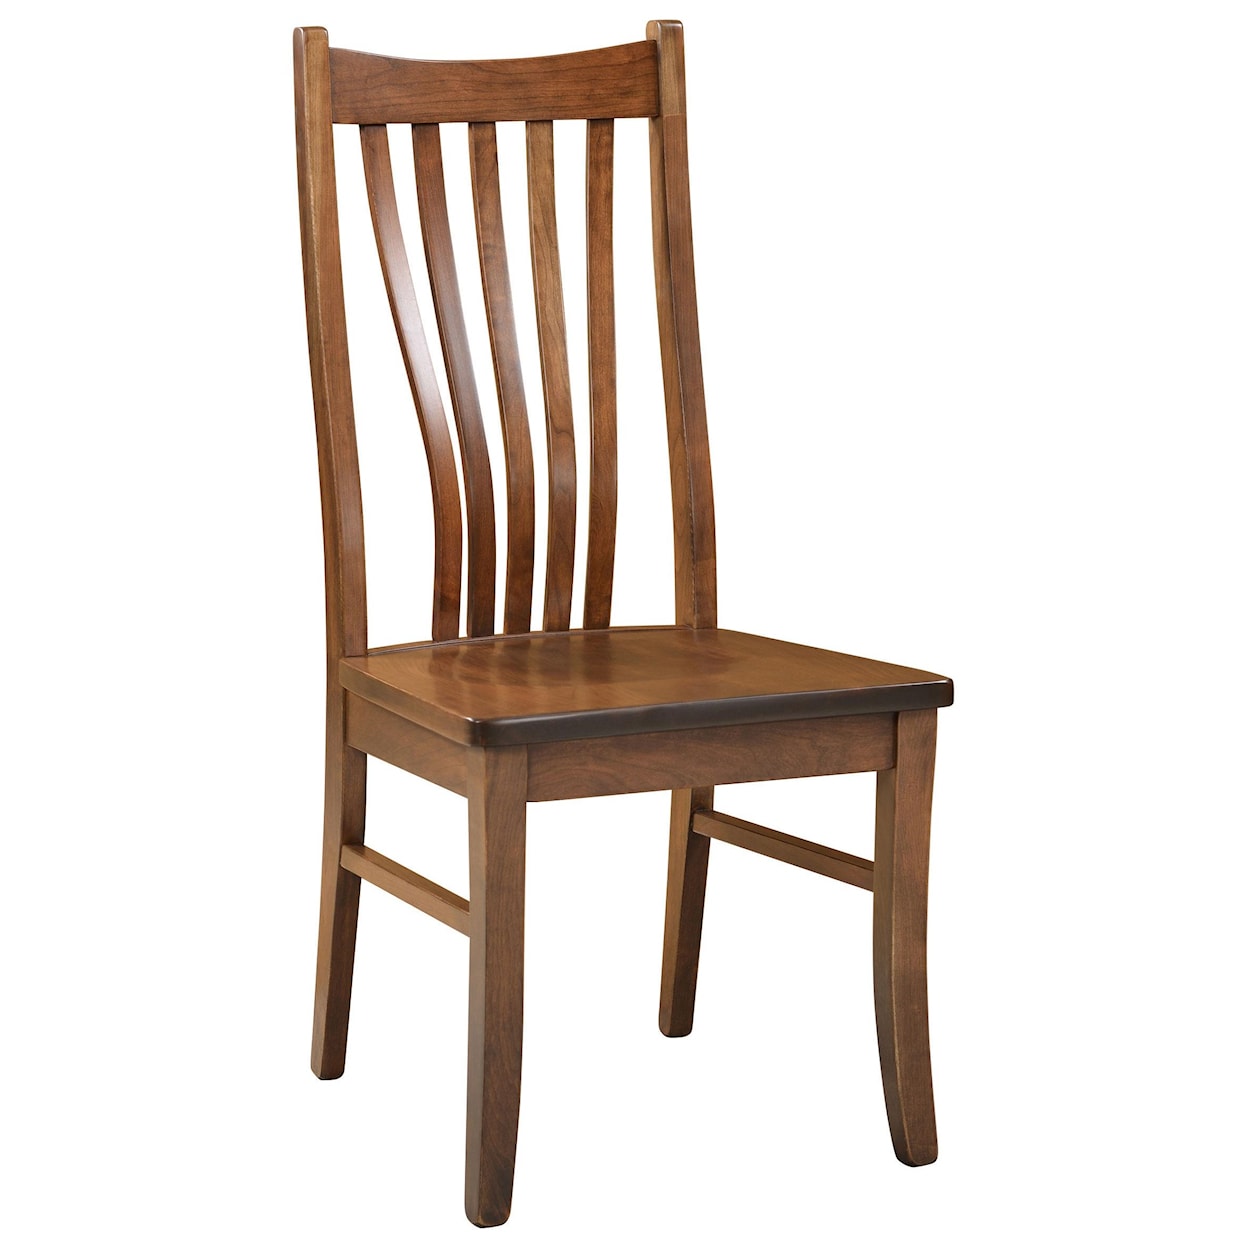 Wengerd Wood Products Reagan Side Chair